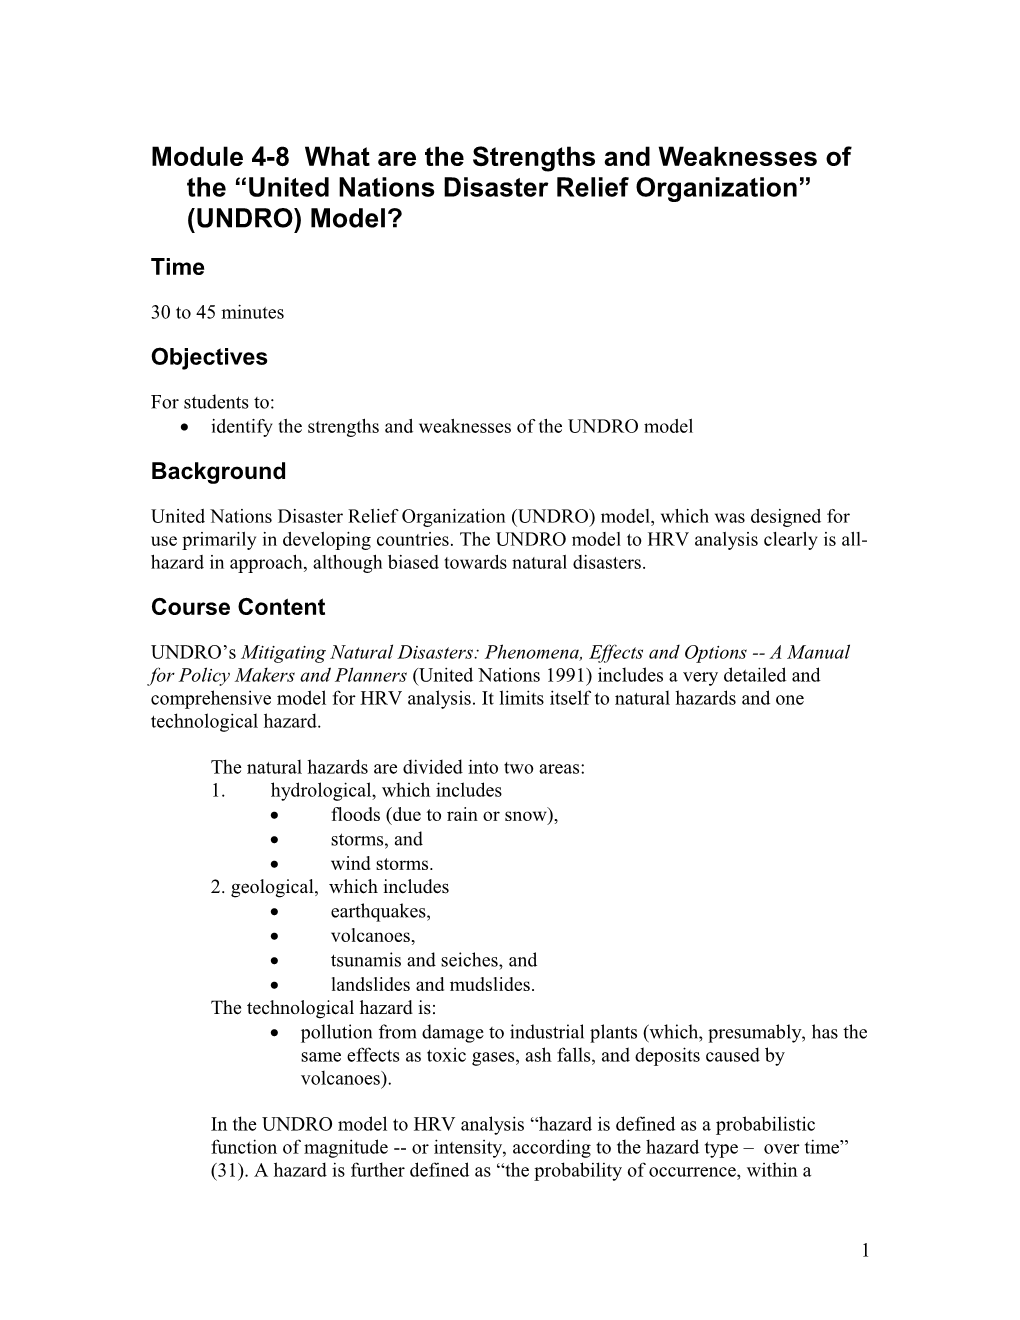 Module 4-8 What Are the Strengths and Weaknesses of the United Nations Disaster Relief